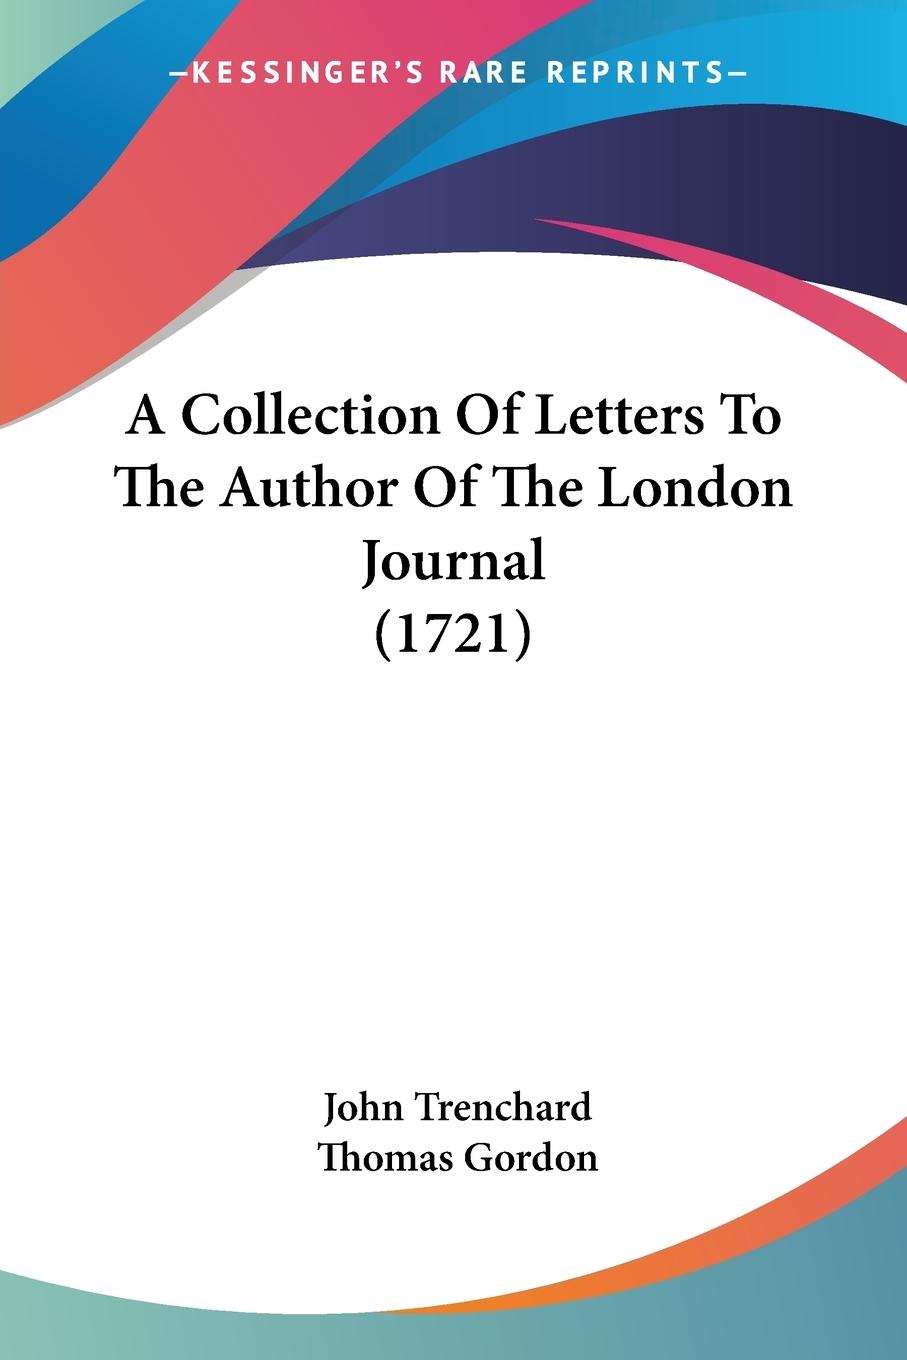 A Collection Of Letters To The Author Of The London Journal (1721) - Trenchard, John Gordon, Thomas